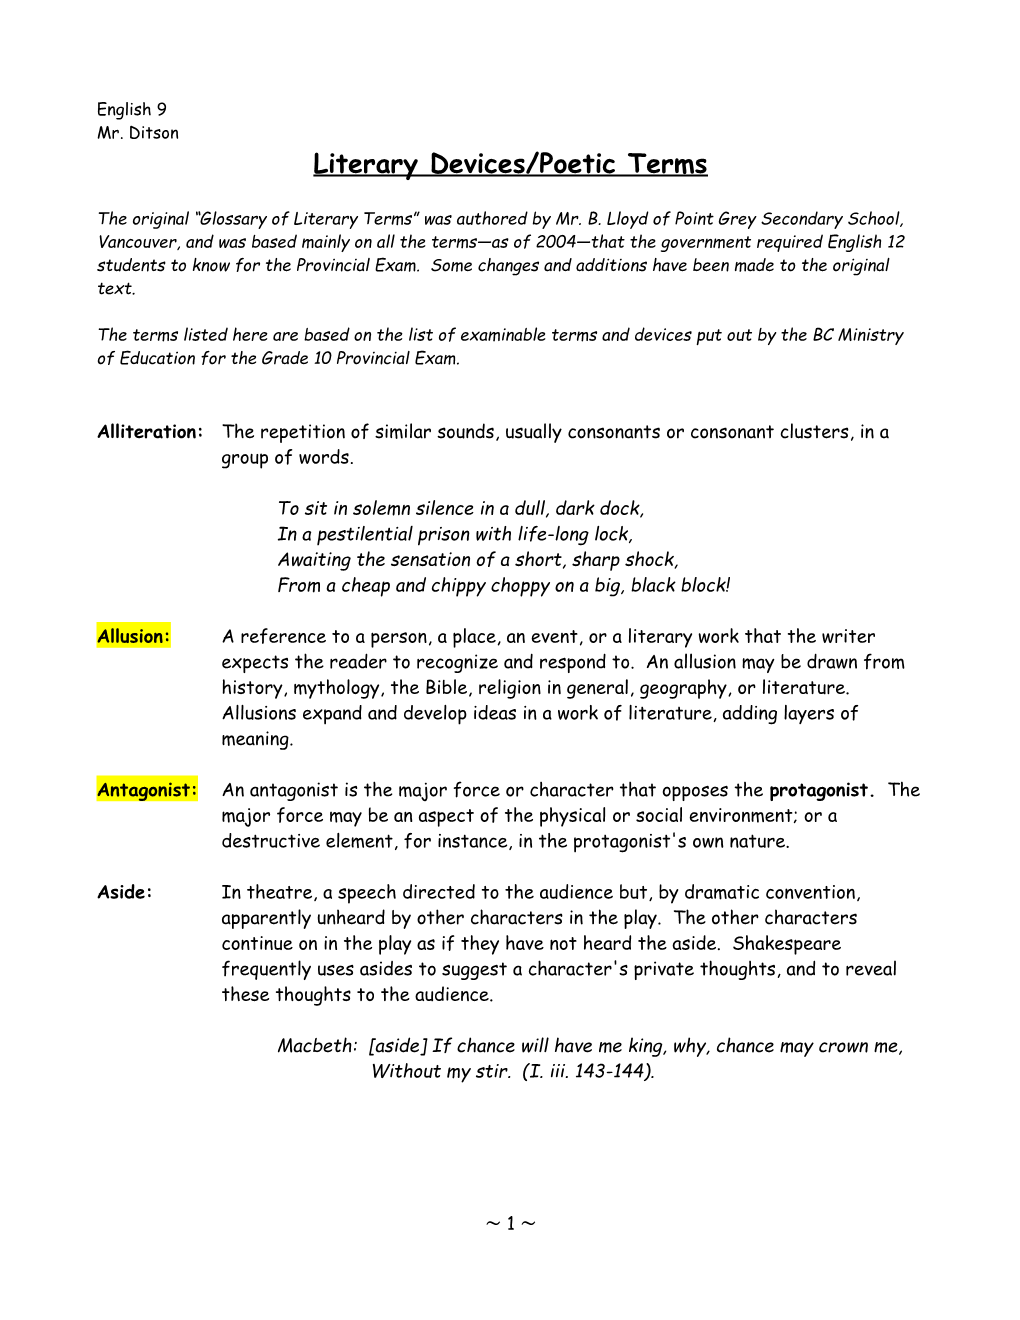 Literary Devices/Poetic Terms